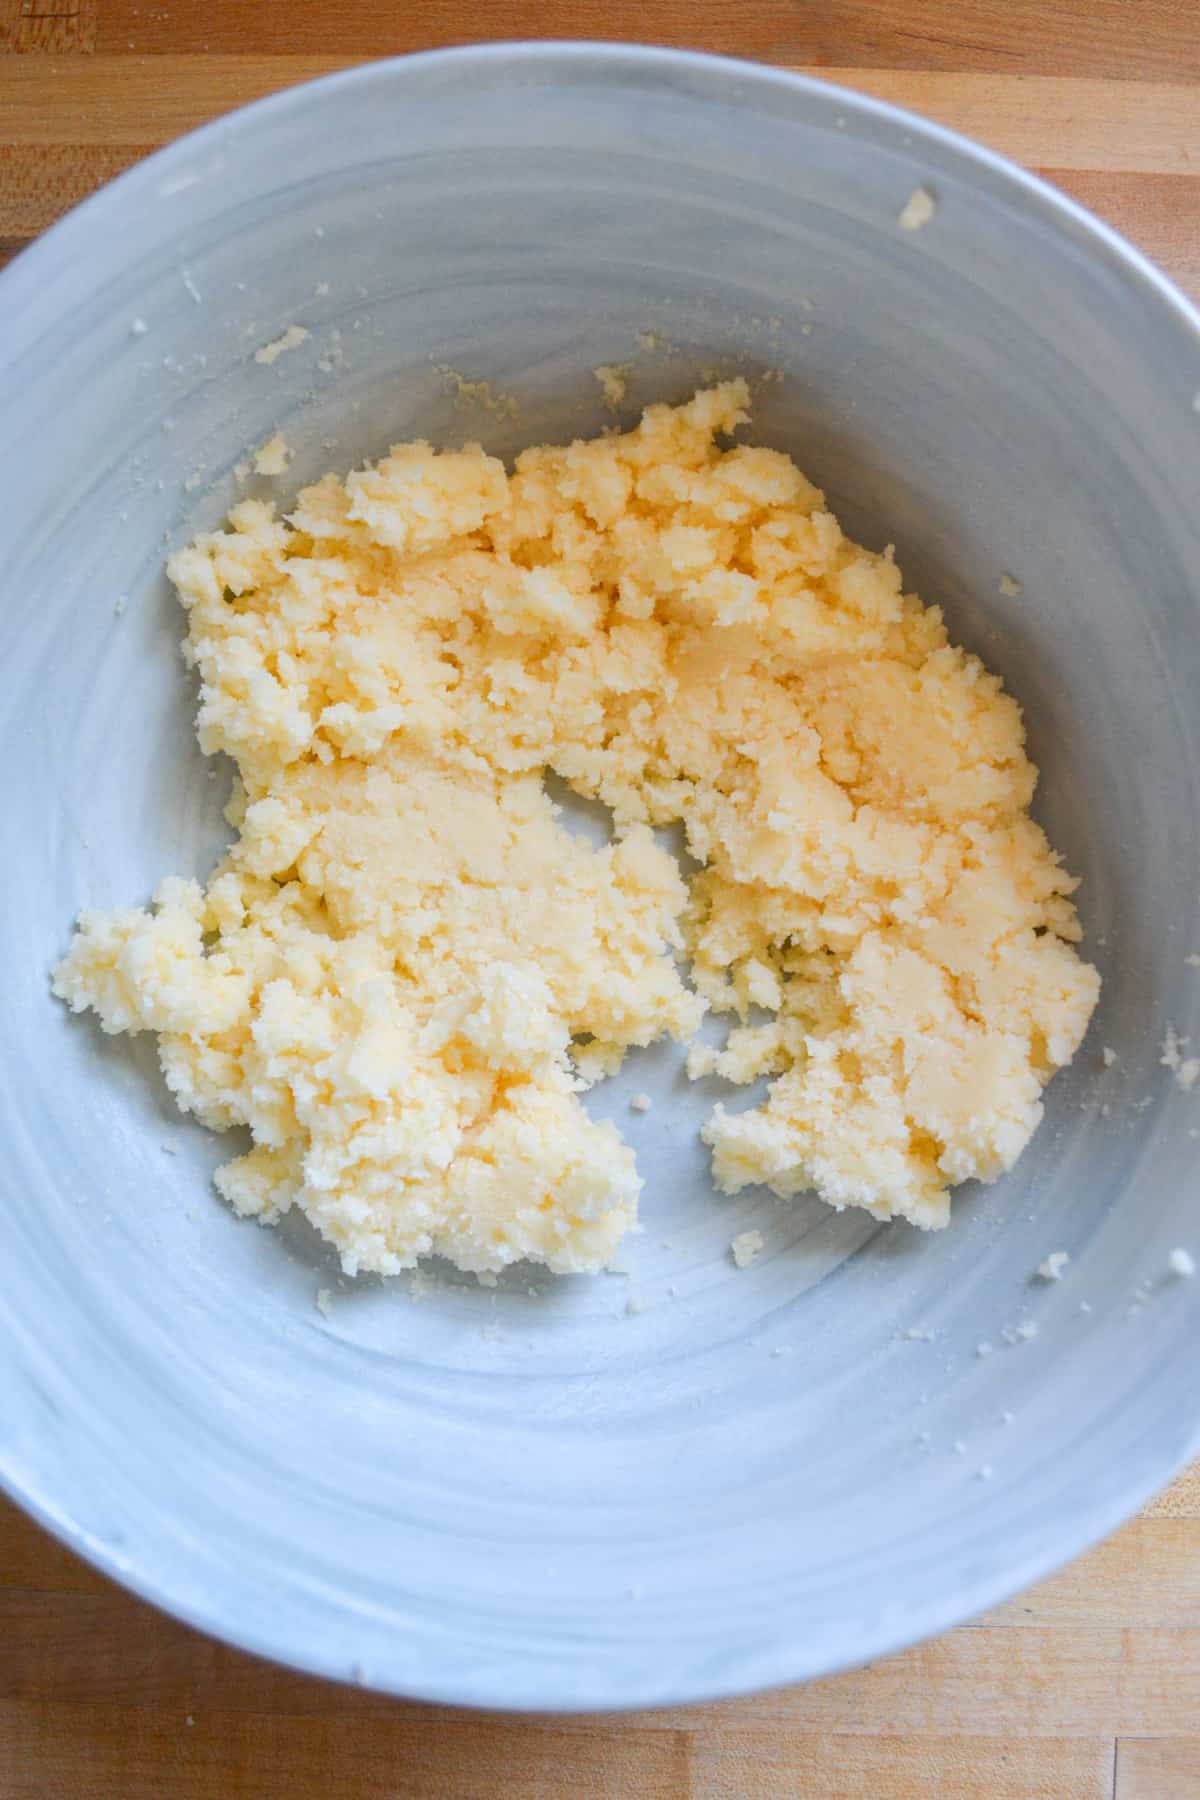 Vegan butter and sugar creamed together in a mixing bowl.